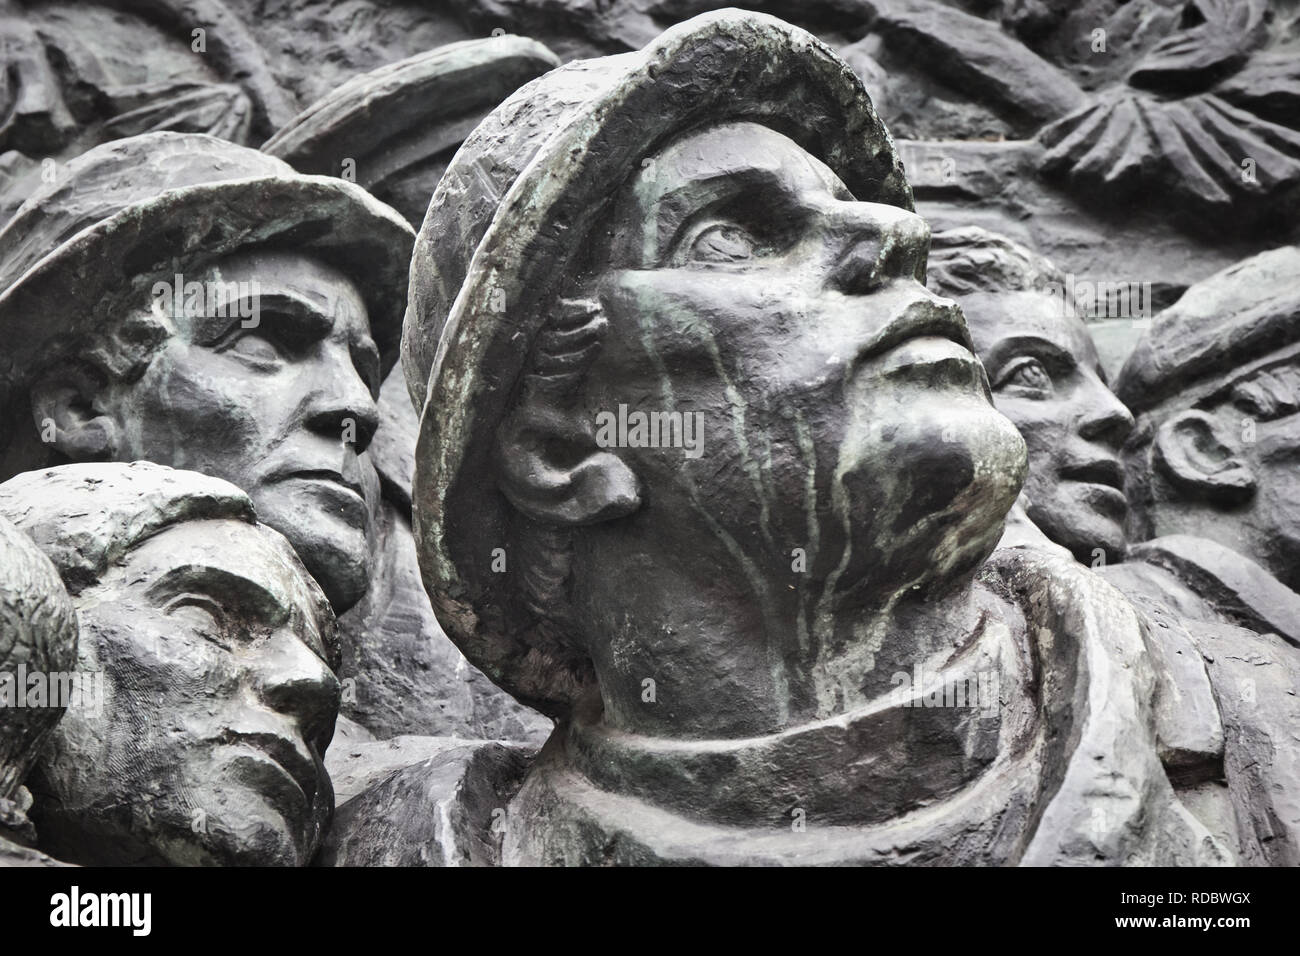 Faces of workers on a May Day demonstration, The Branting Monument, Norra Bantorget, Norrmalm, Stockholm, Sweden, Scandinavia Stock Photo